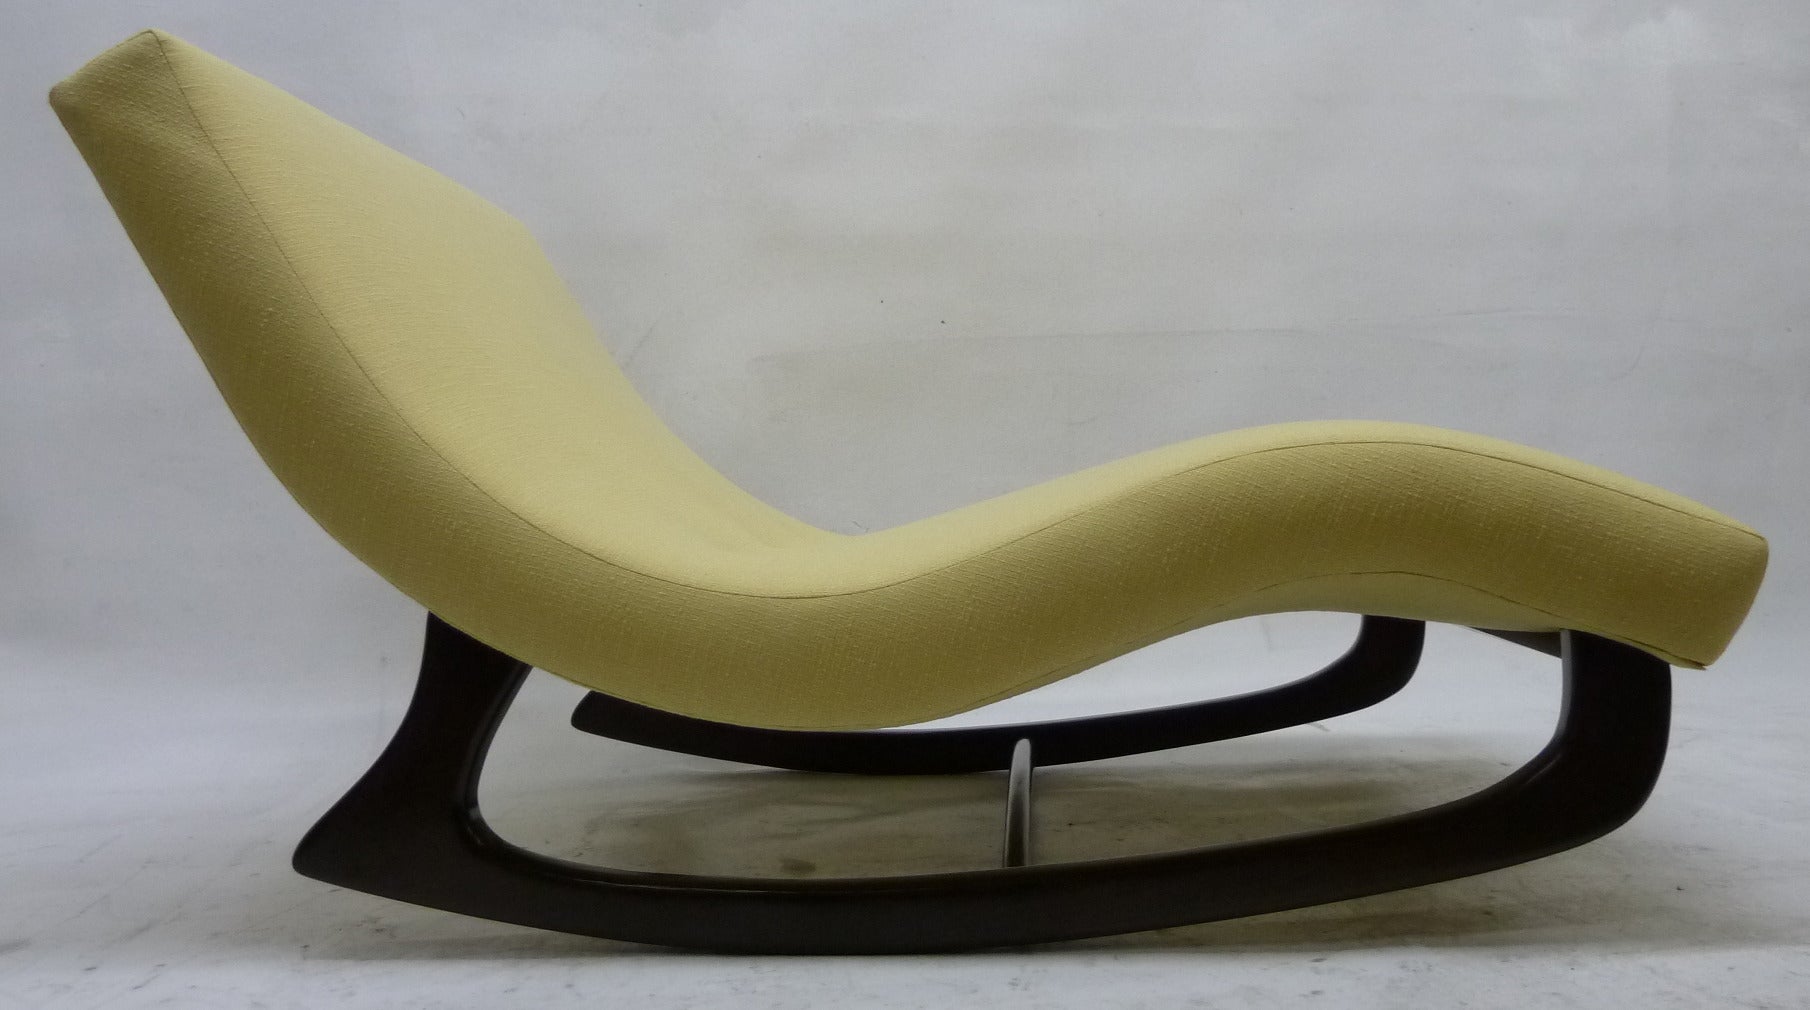 Sculptural Rocking Chaise Longue by Adrian Pearsall